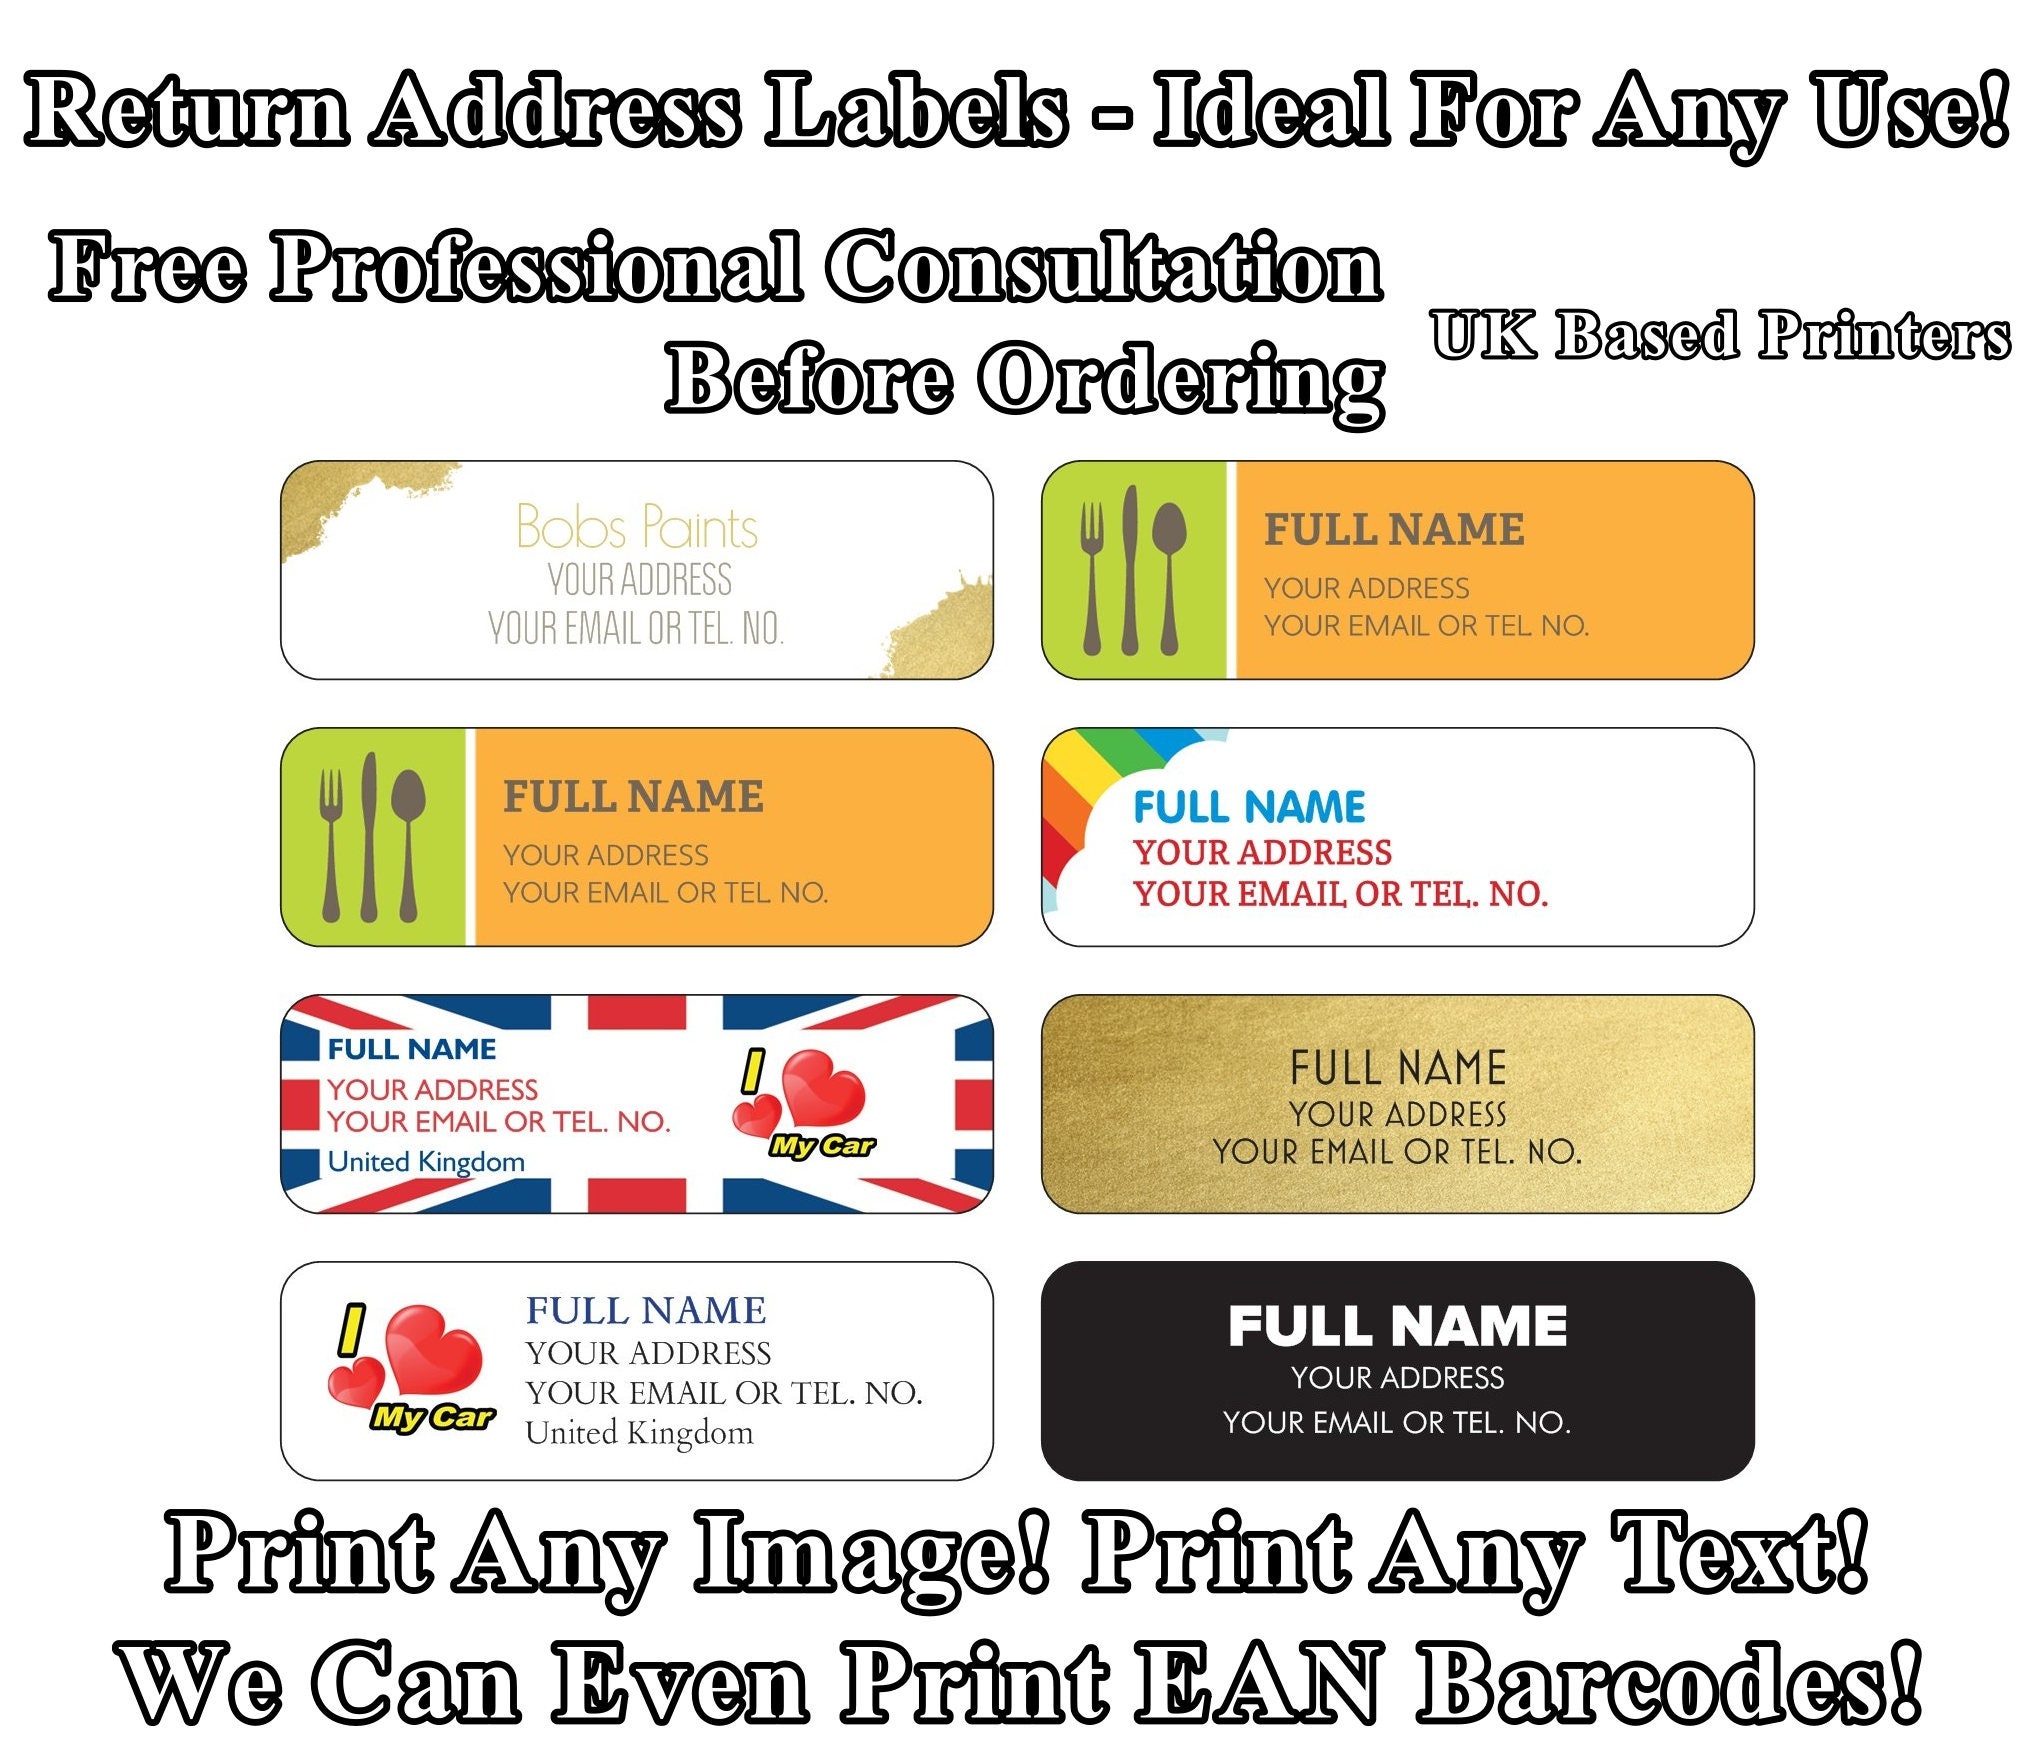 create-your-own-return-address-labels-free-professional